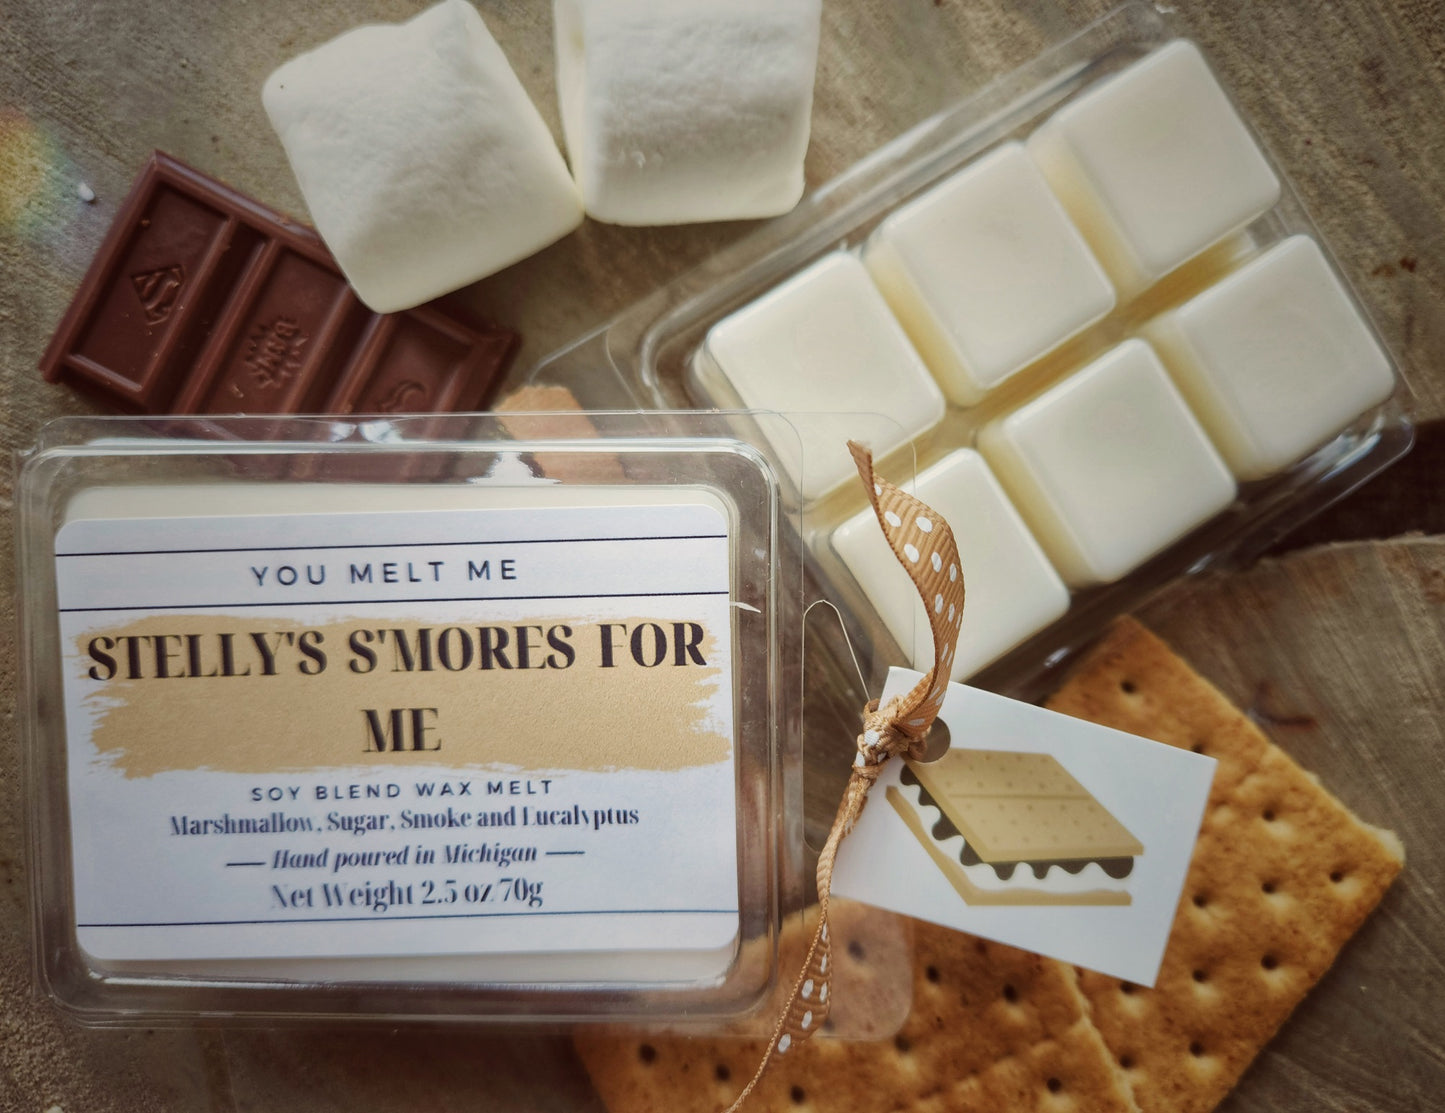 Stelly's S'Mores for Me